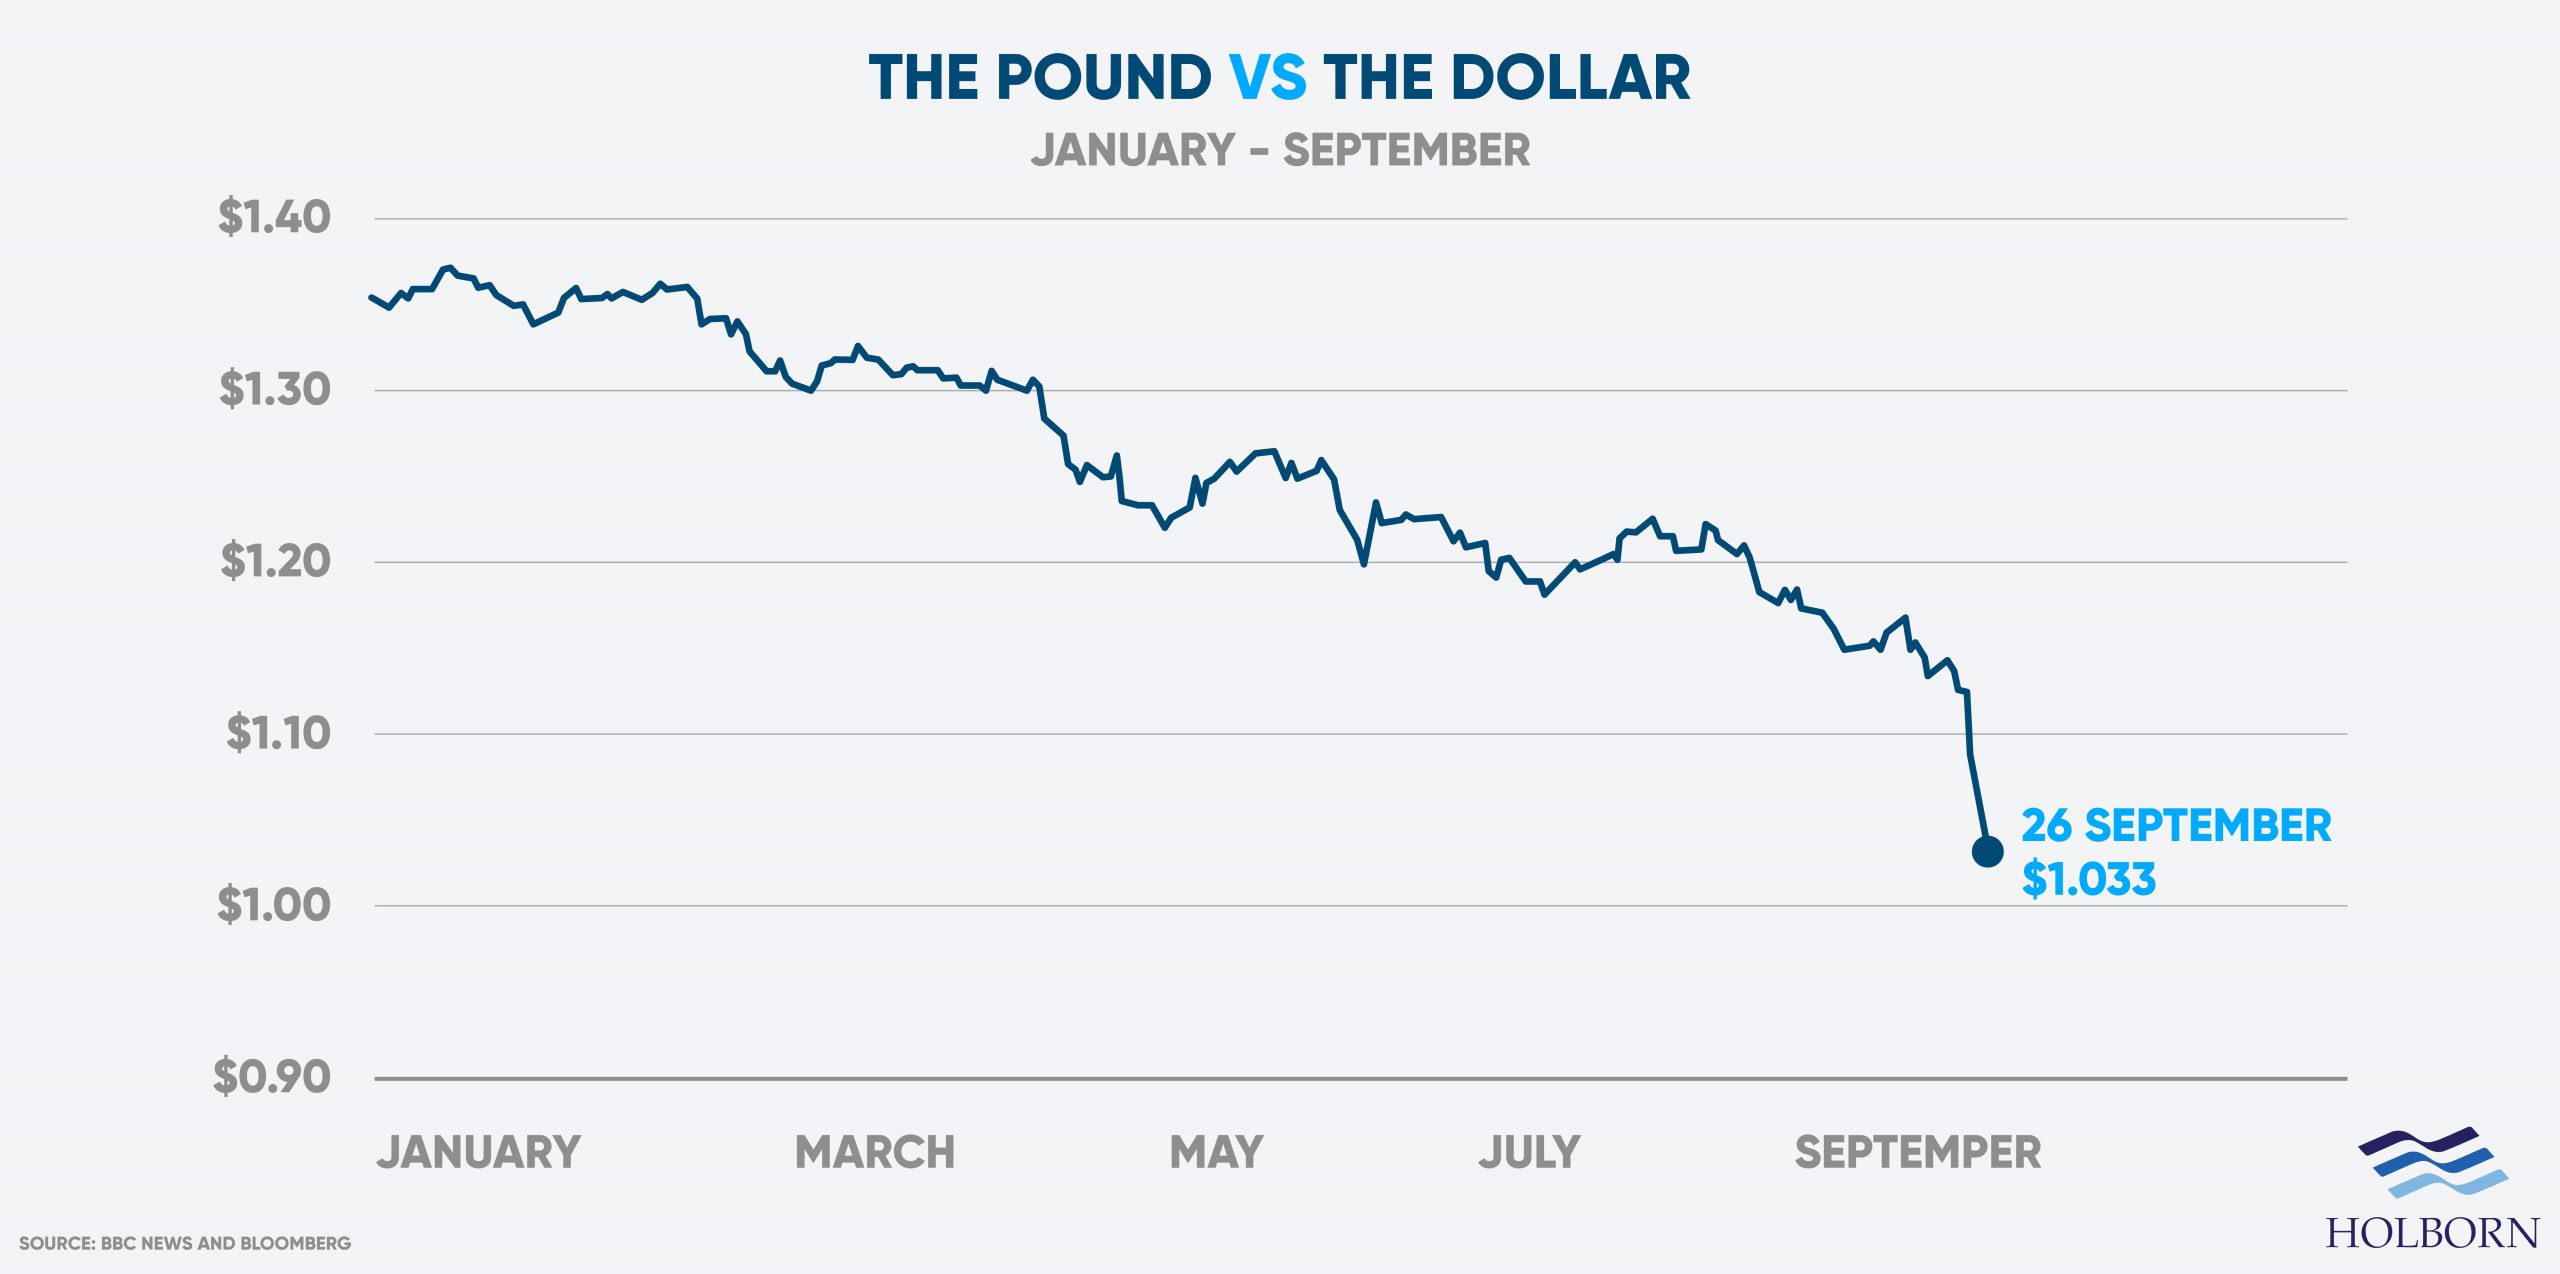 Pound's value against the dollar